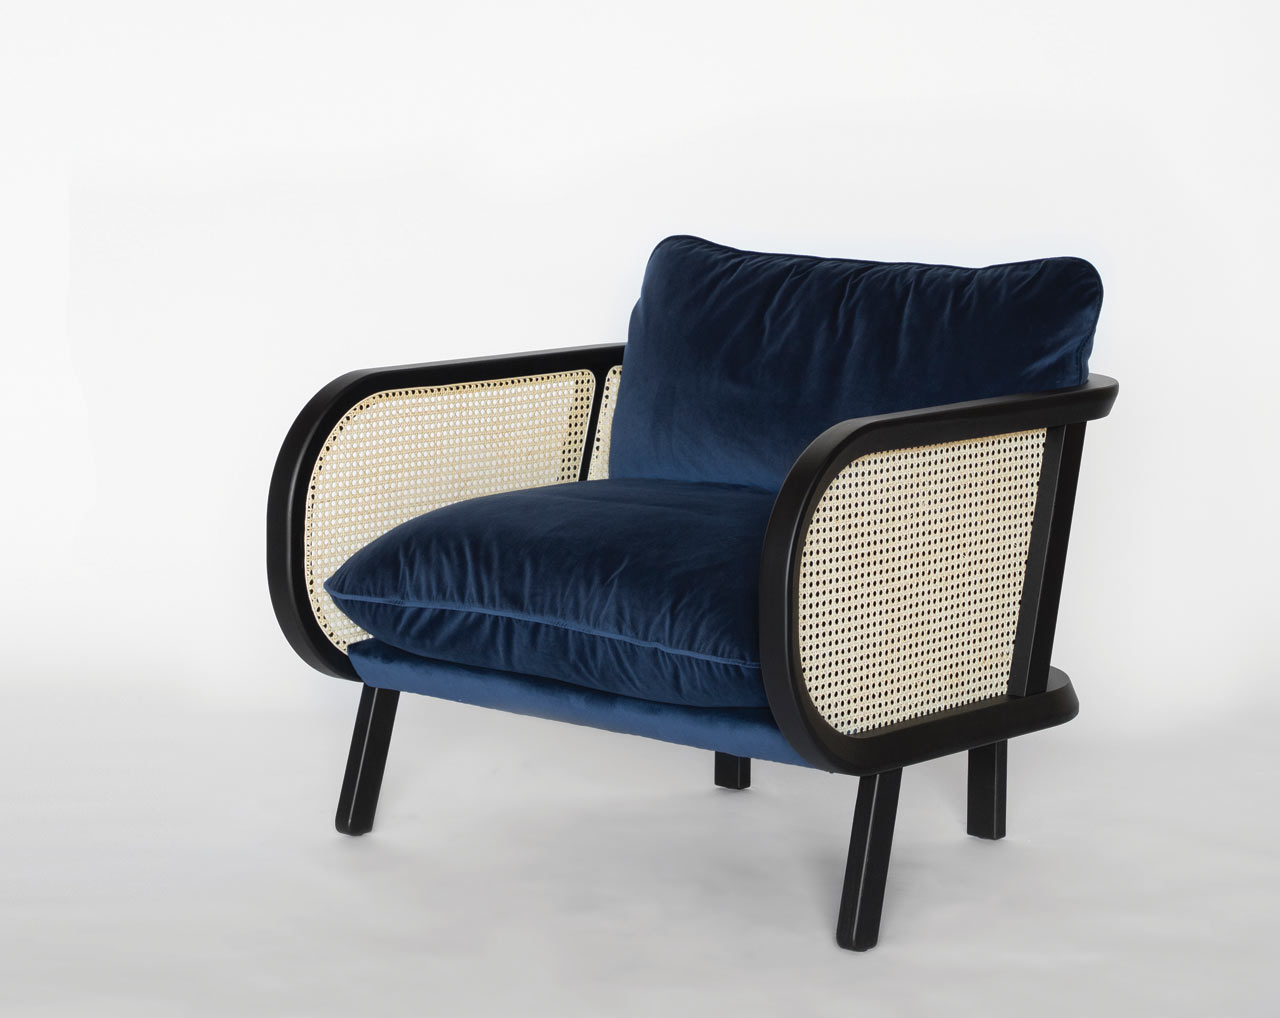 BuzziCane: Modern Seating with Traditional Woven Cane Backs